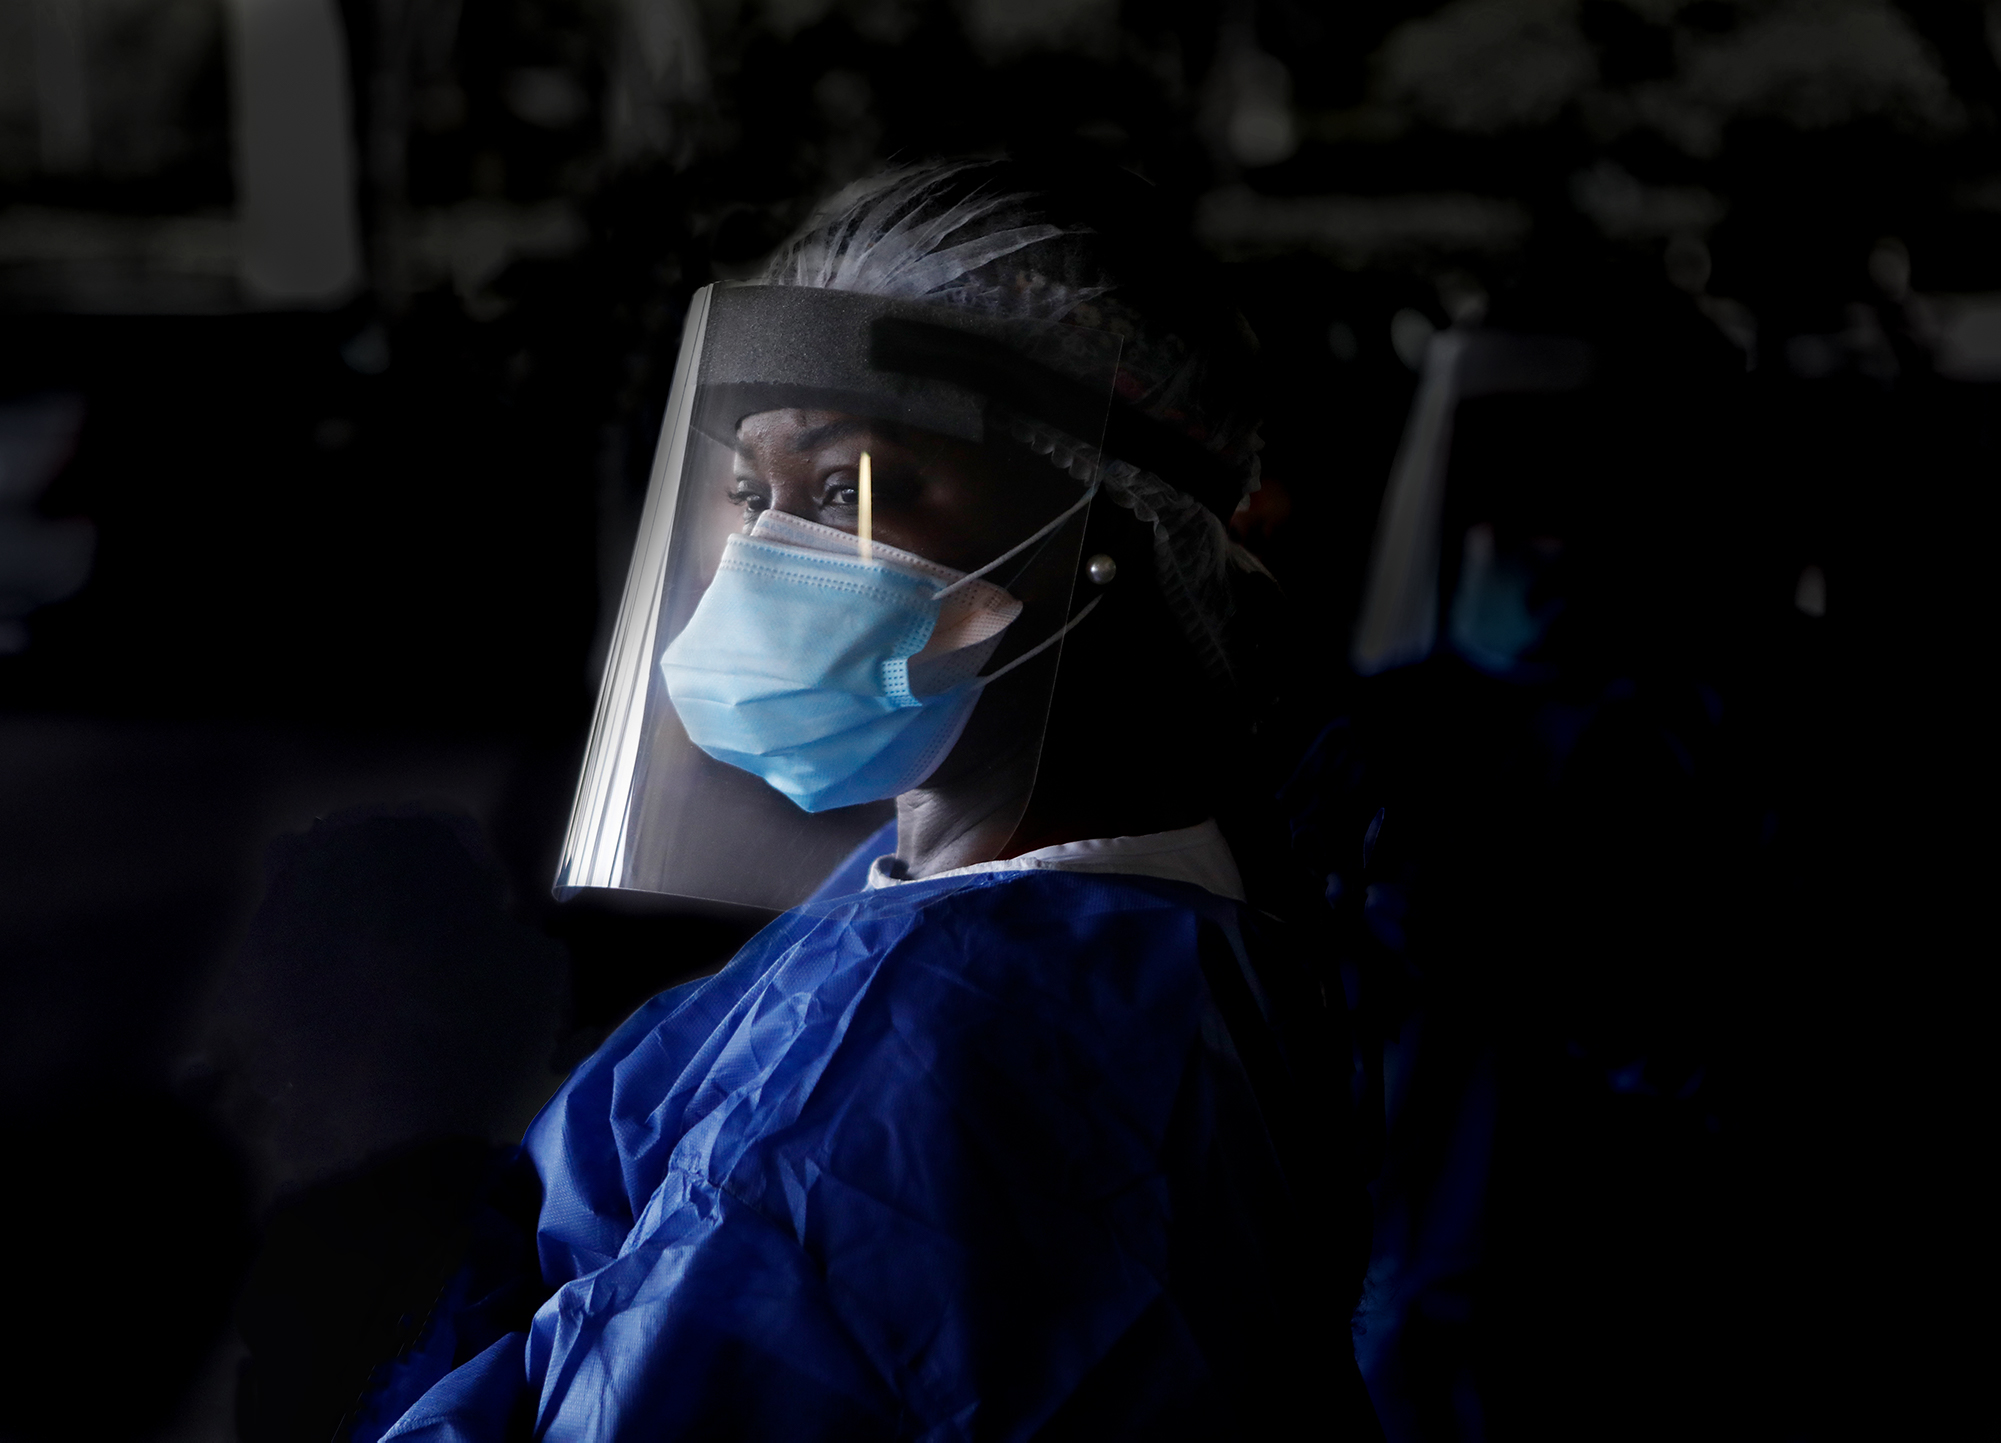 A medical professional wearing protective equipment